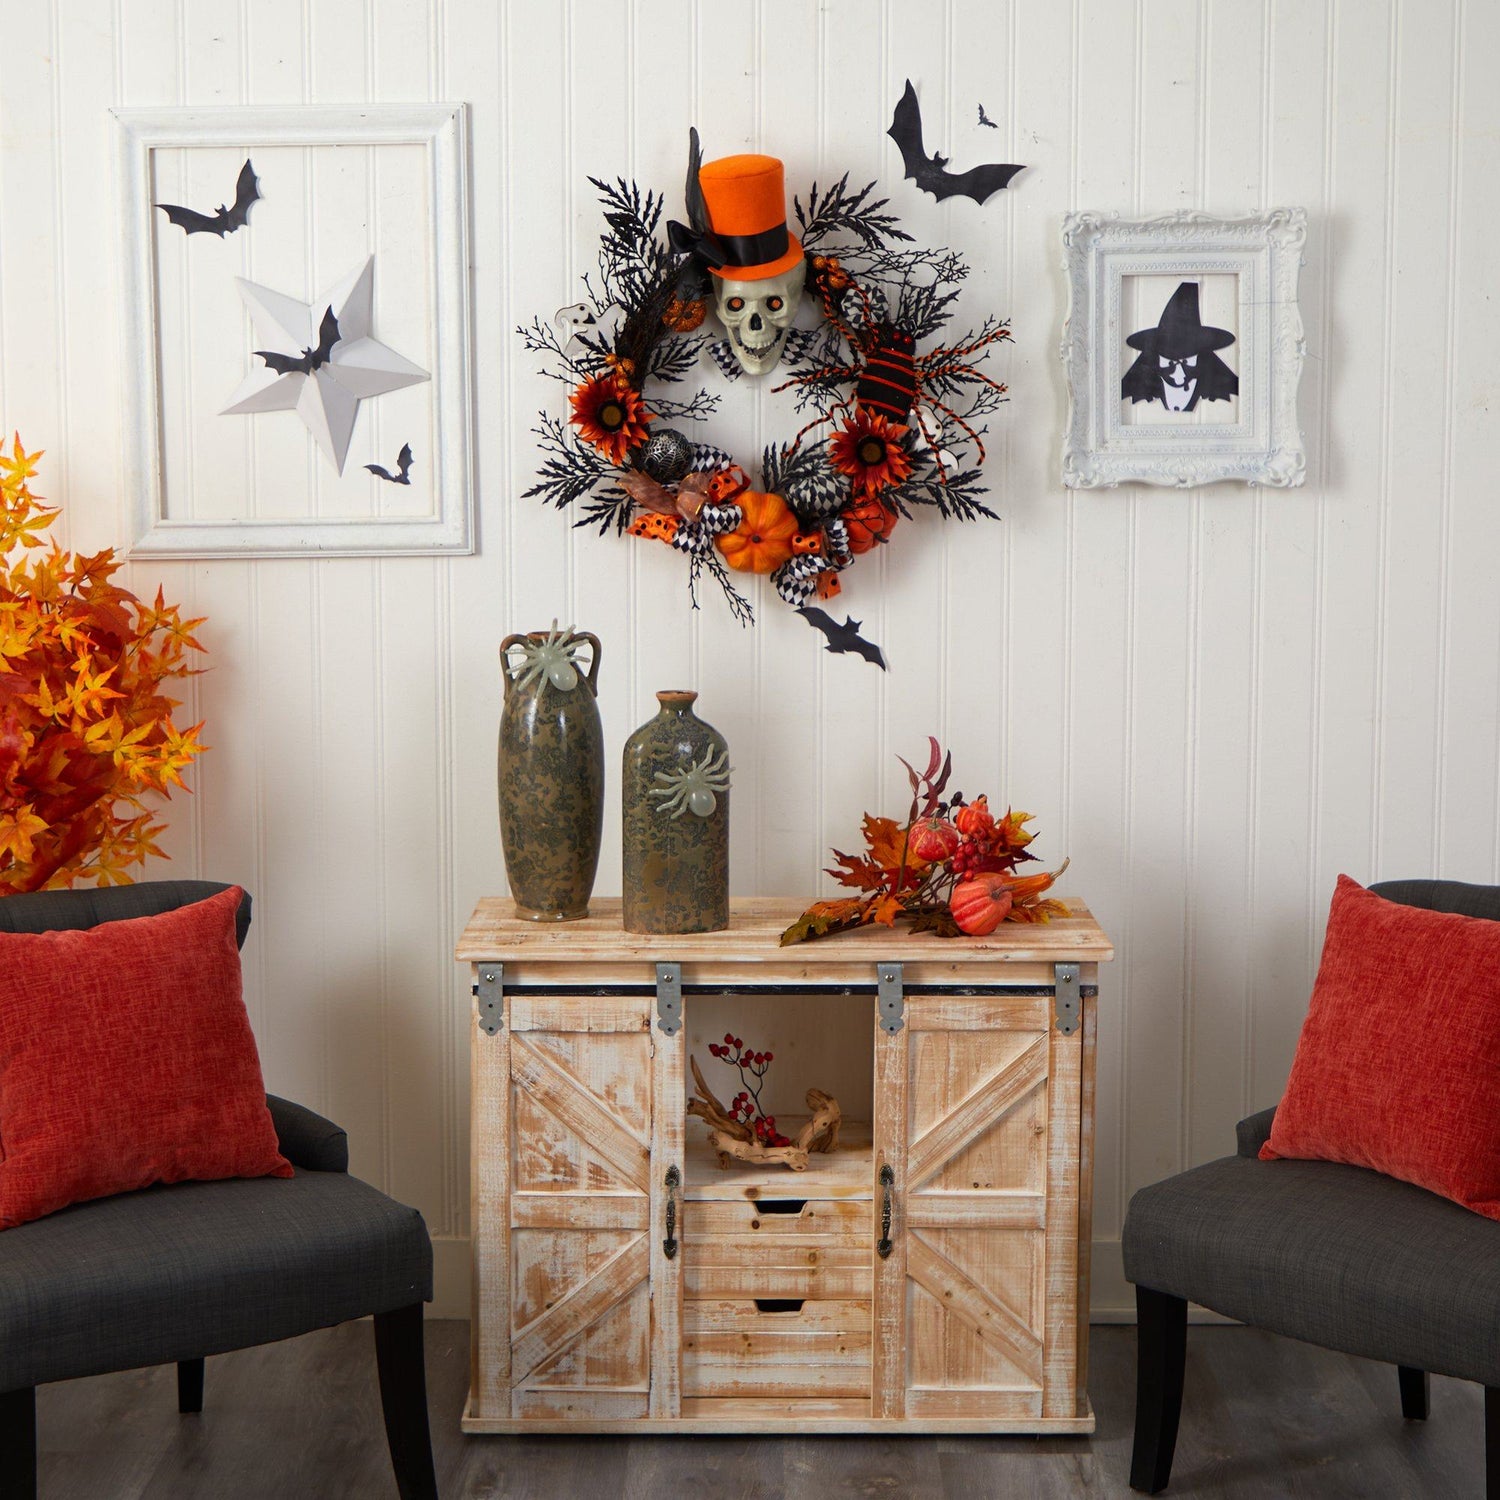 30” Spider and Skull with Top Hat Halloween Wreath